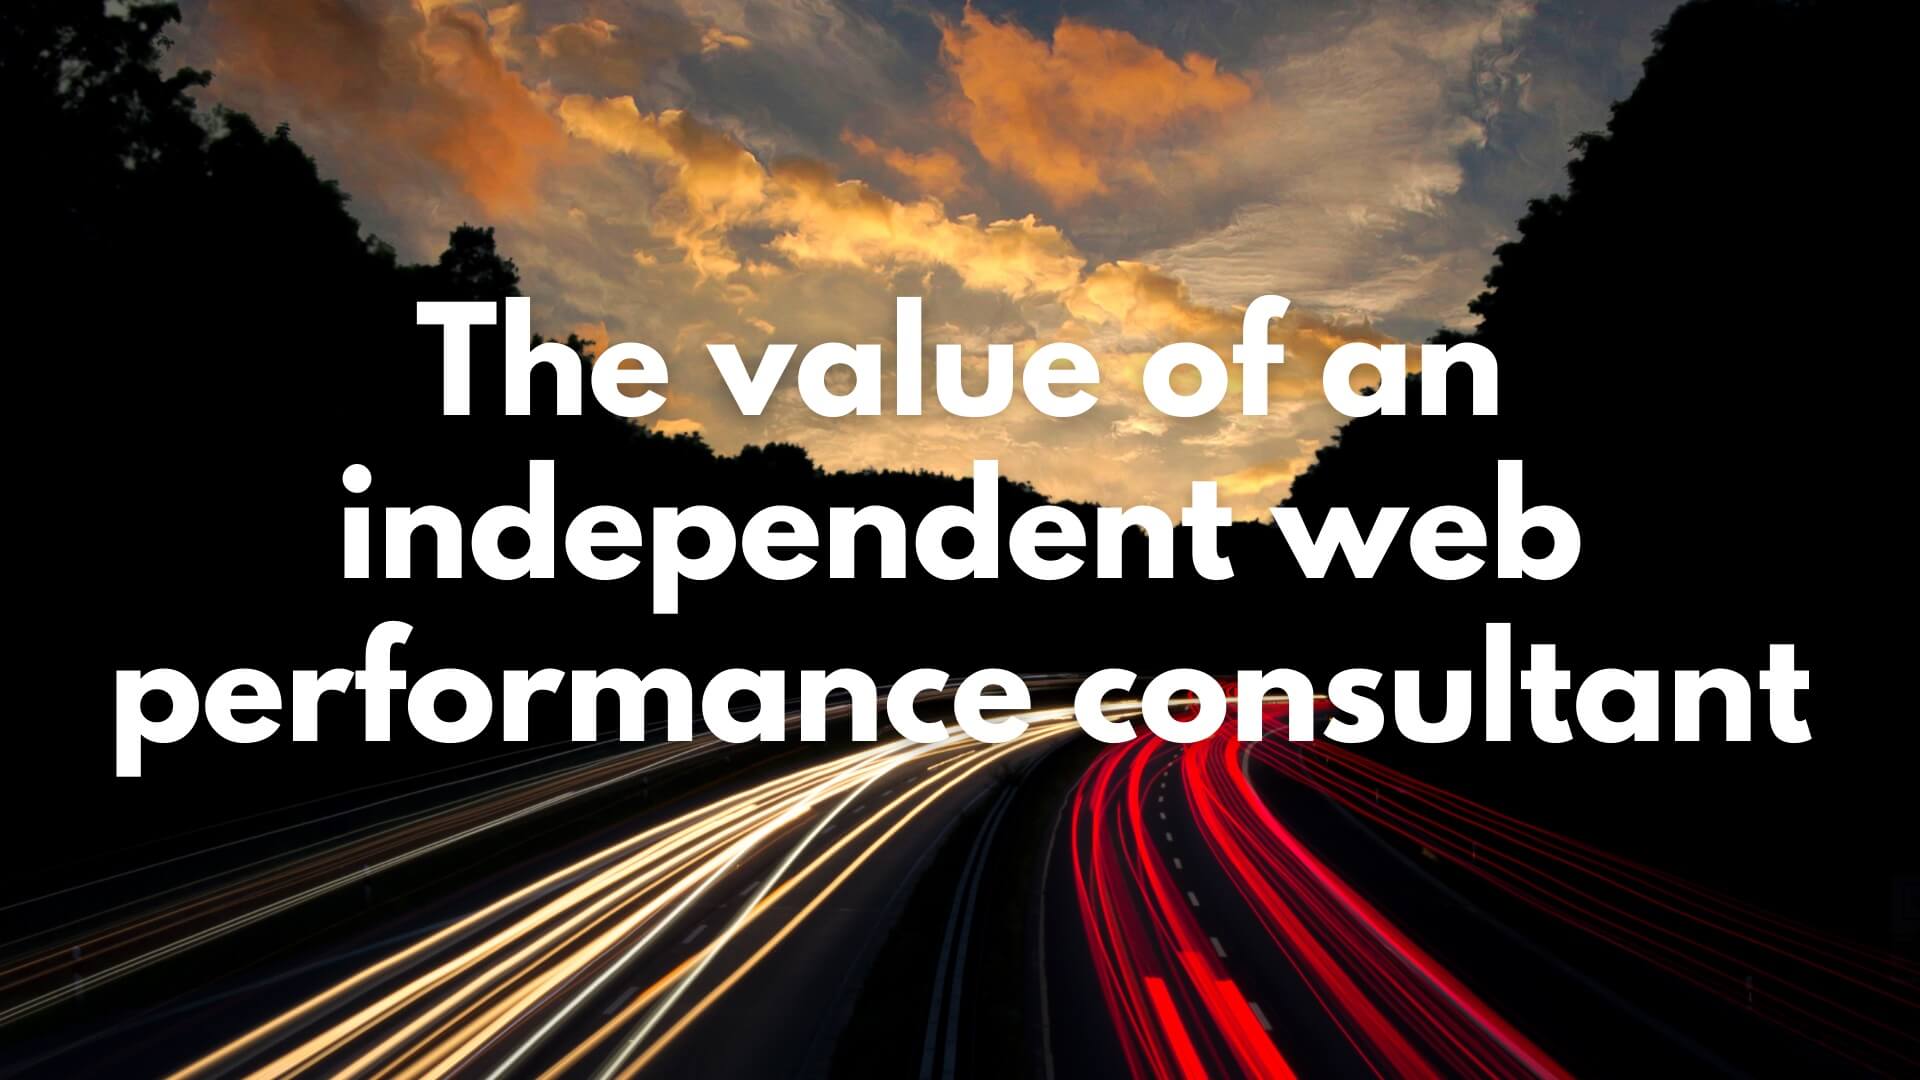 The value of an independent web performance consultant